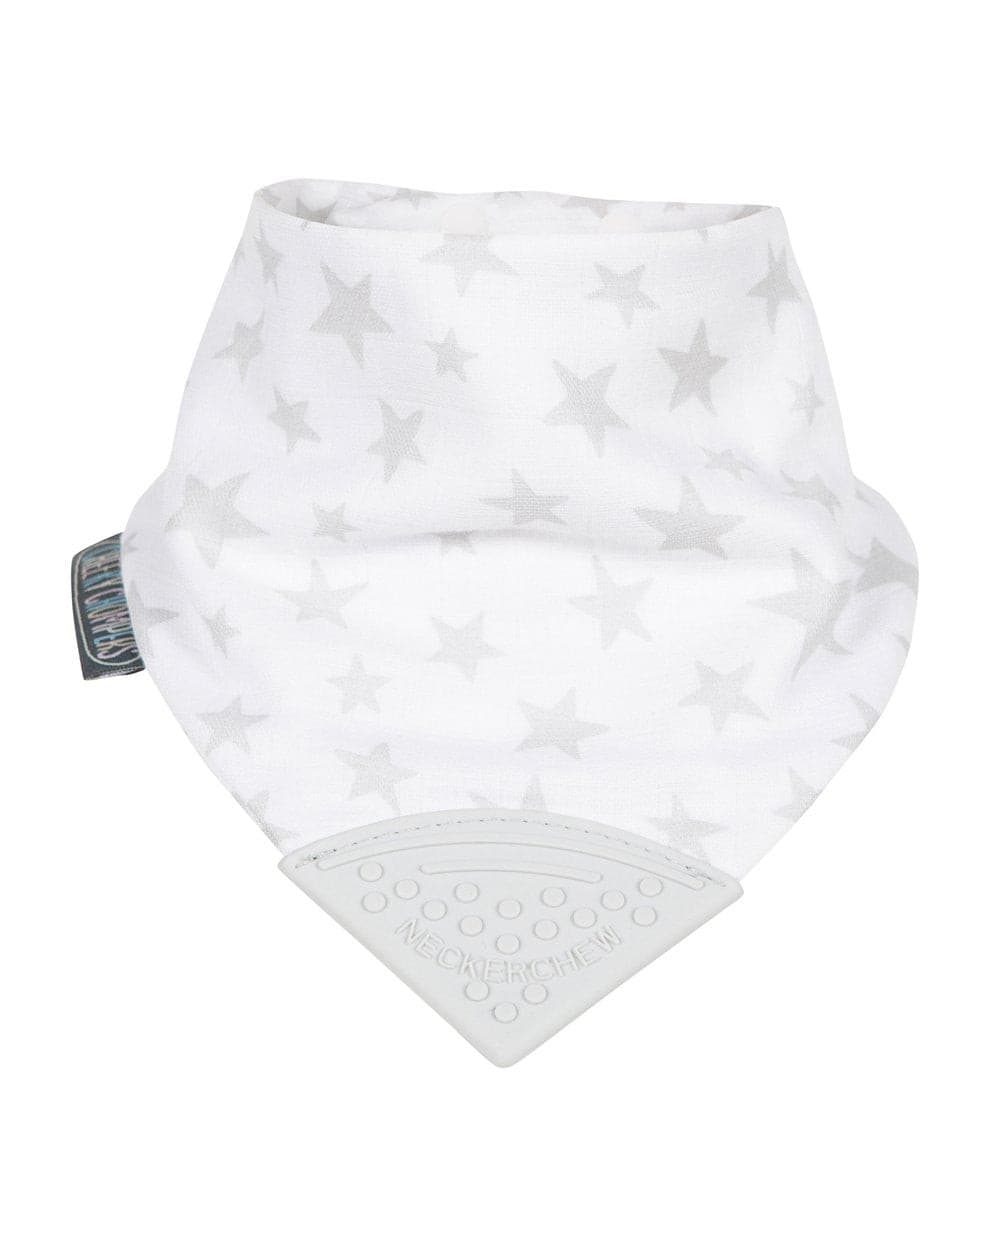 Cheeky Chompers Dribble Bandana Bibs with Teether Attached with teether Super absorbent - 3 layers Hygienic  2 bibs in one Plain layers: 100% cotton Suitable for 2 months - 2 years grey stars